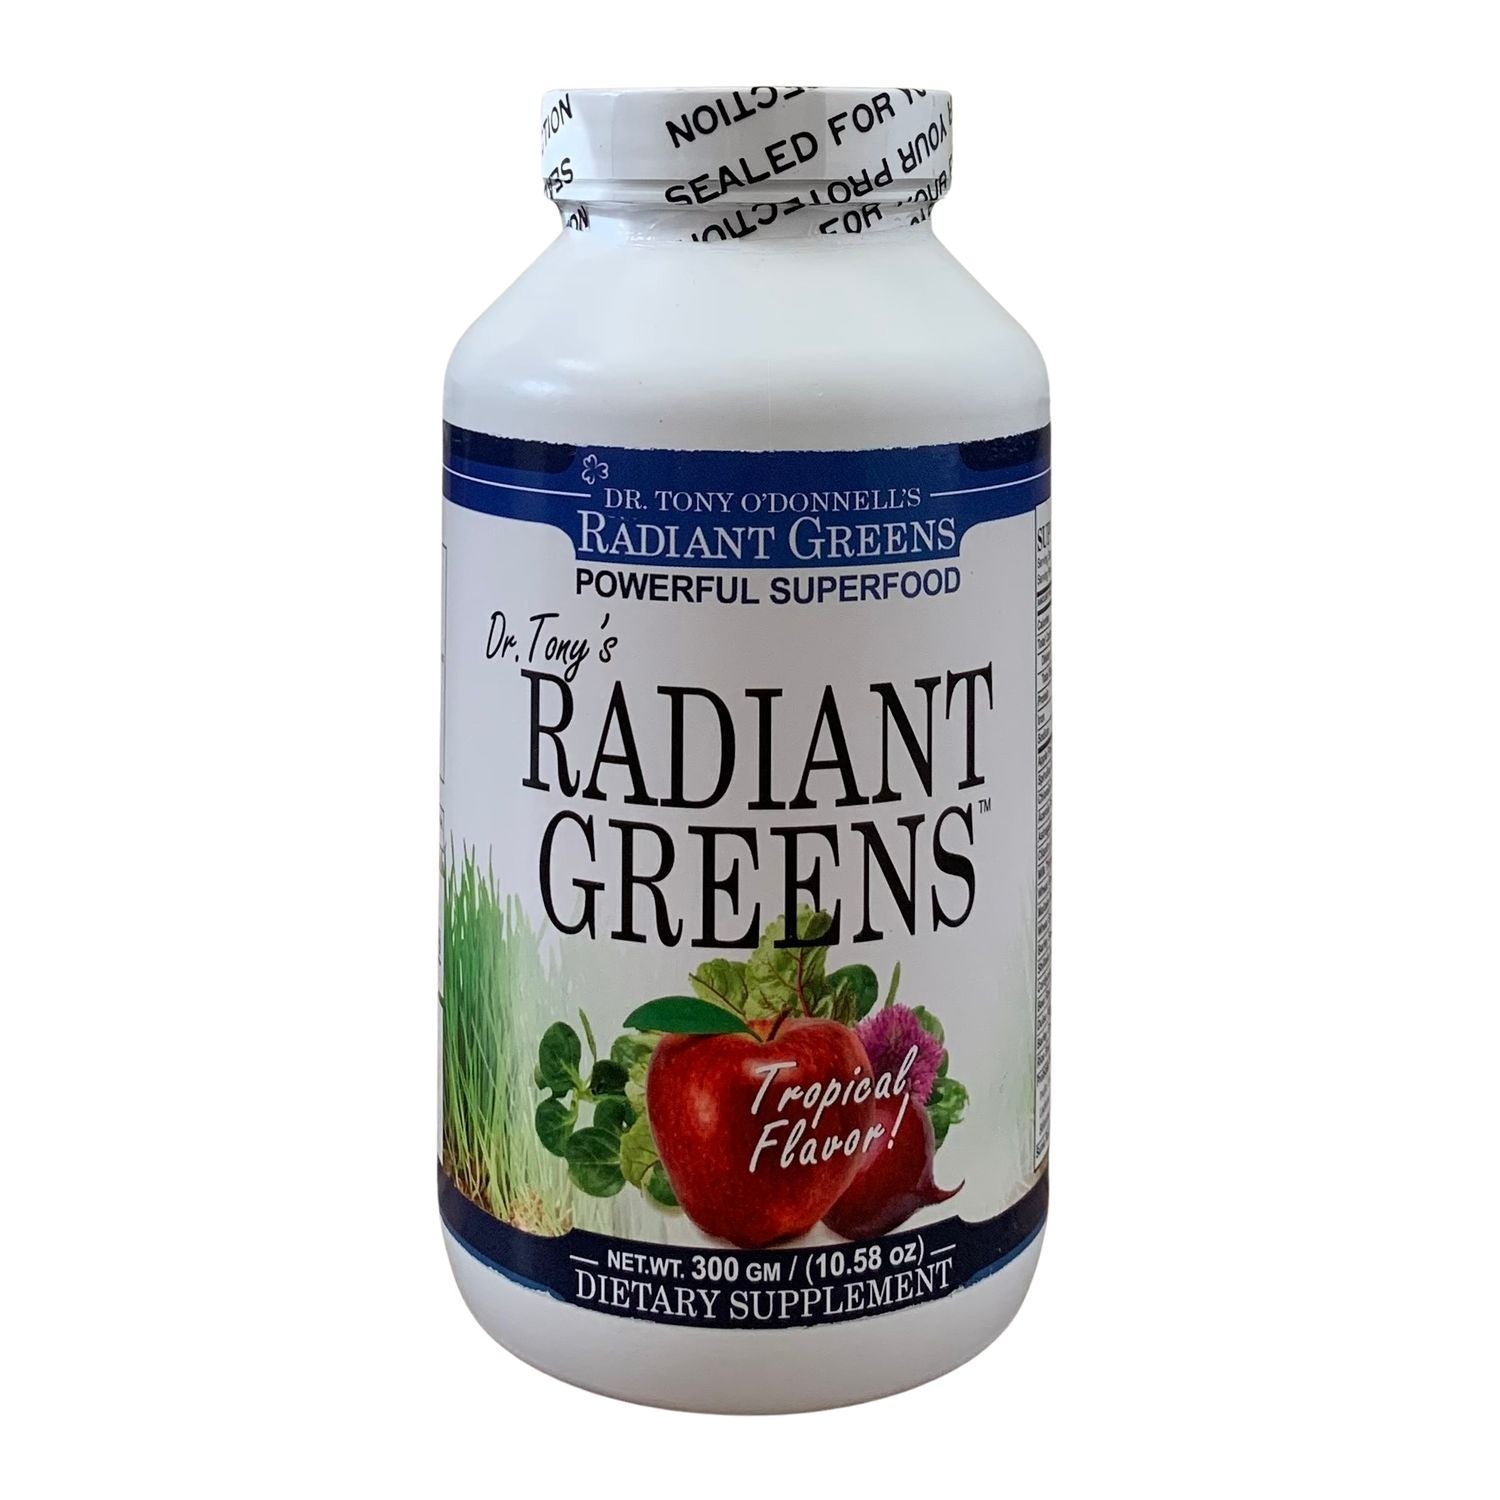 Dr. Tony O'Donnell's Radiant Greens Tropical Flavor | NON-GMO Superfood Powder Formulation - 9.6 Ounces